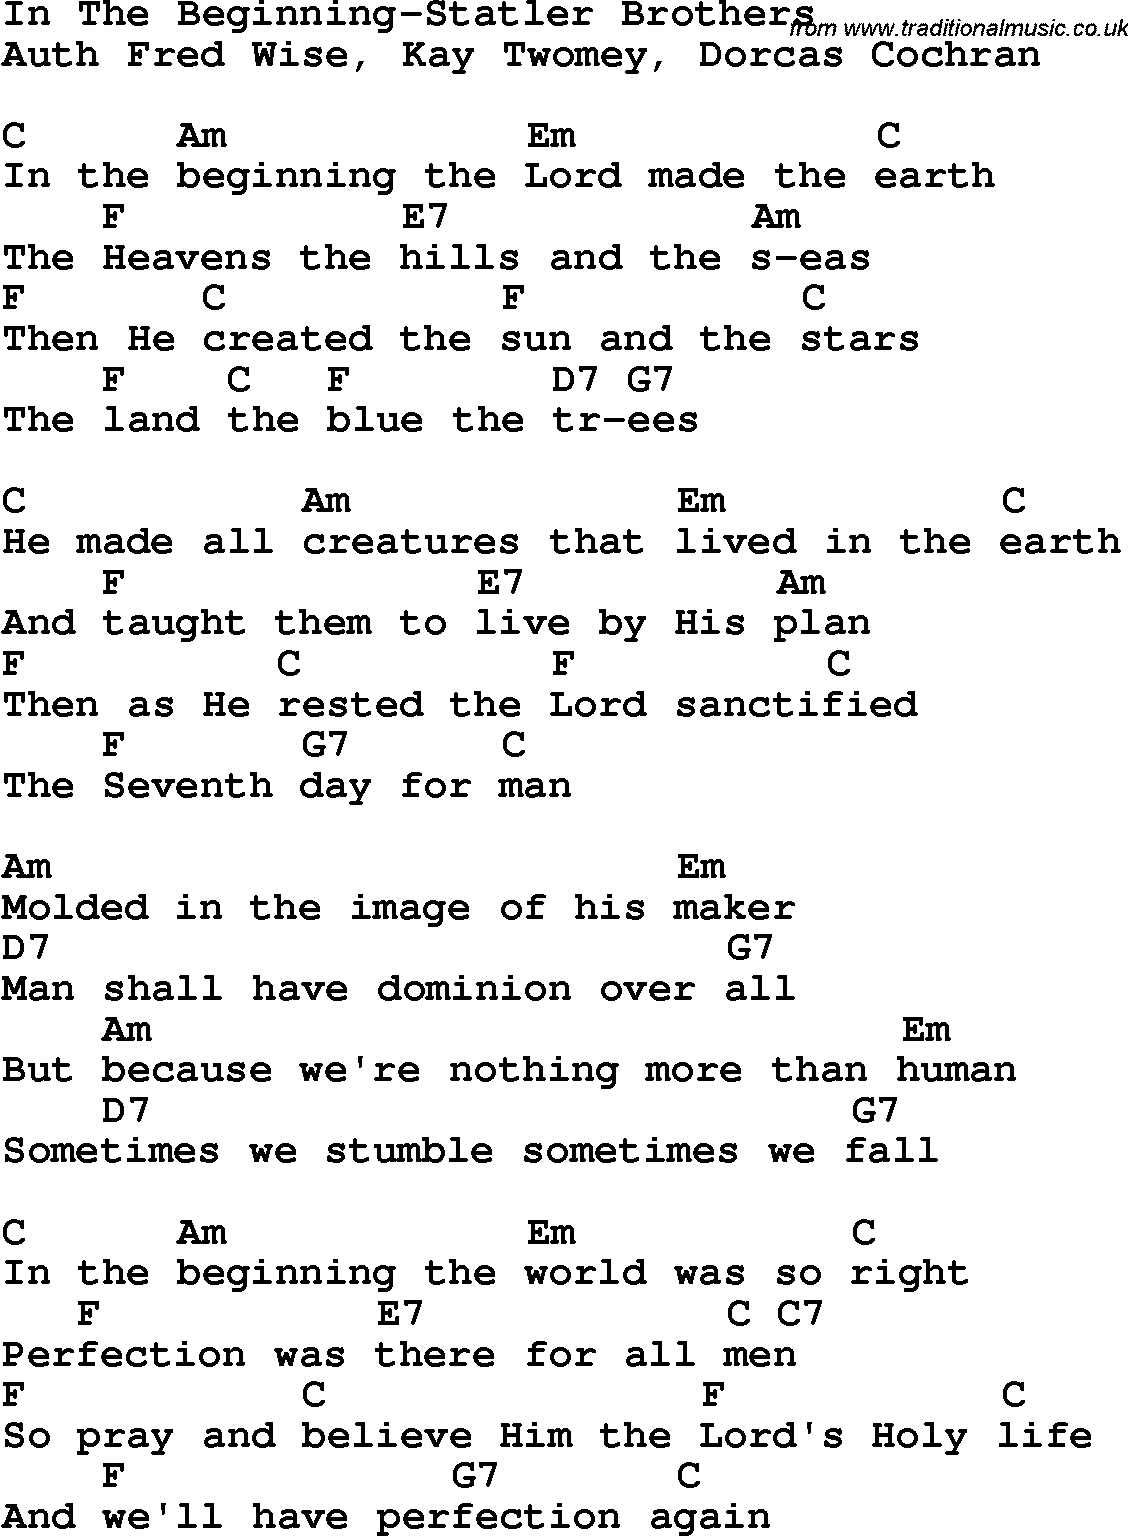 Country, Southern and Bluegrass Gospel Song In The Beginning-Statler Brothers lyrics and chords